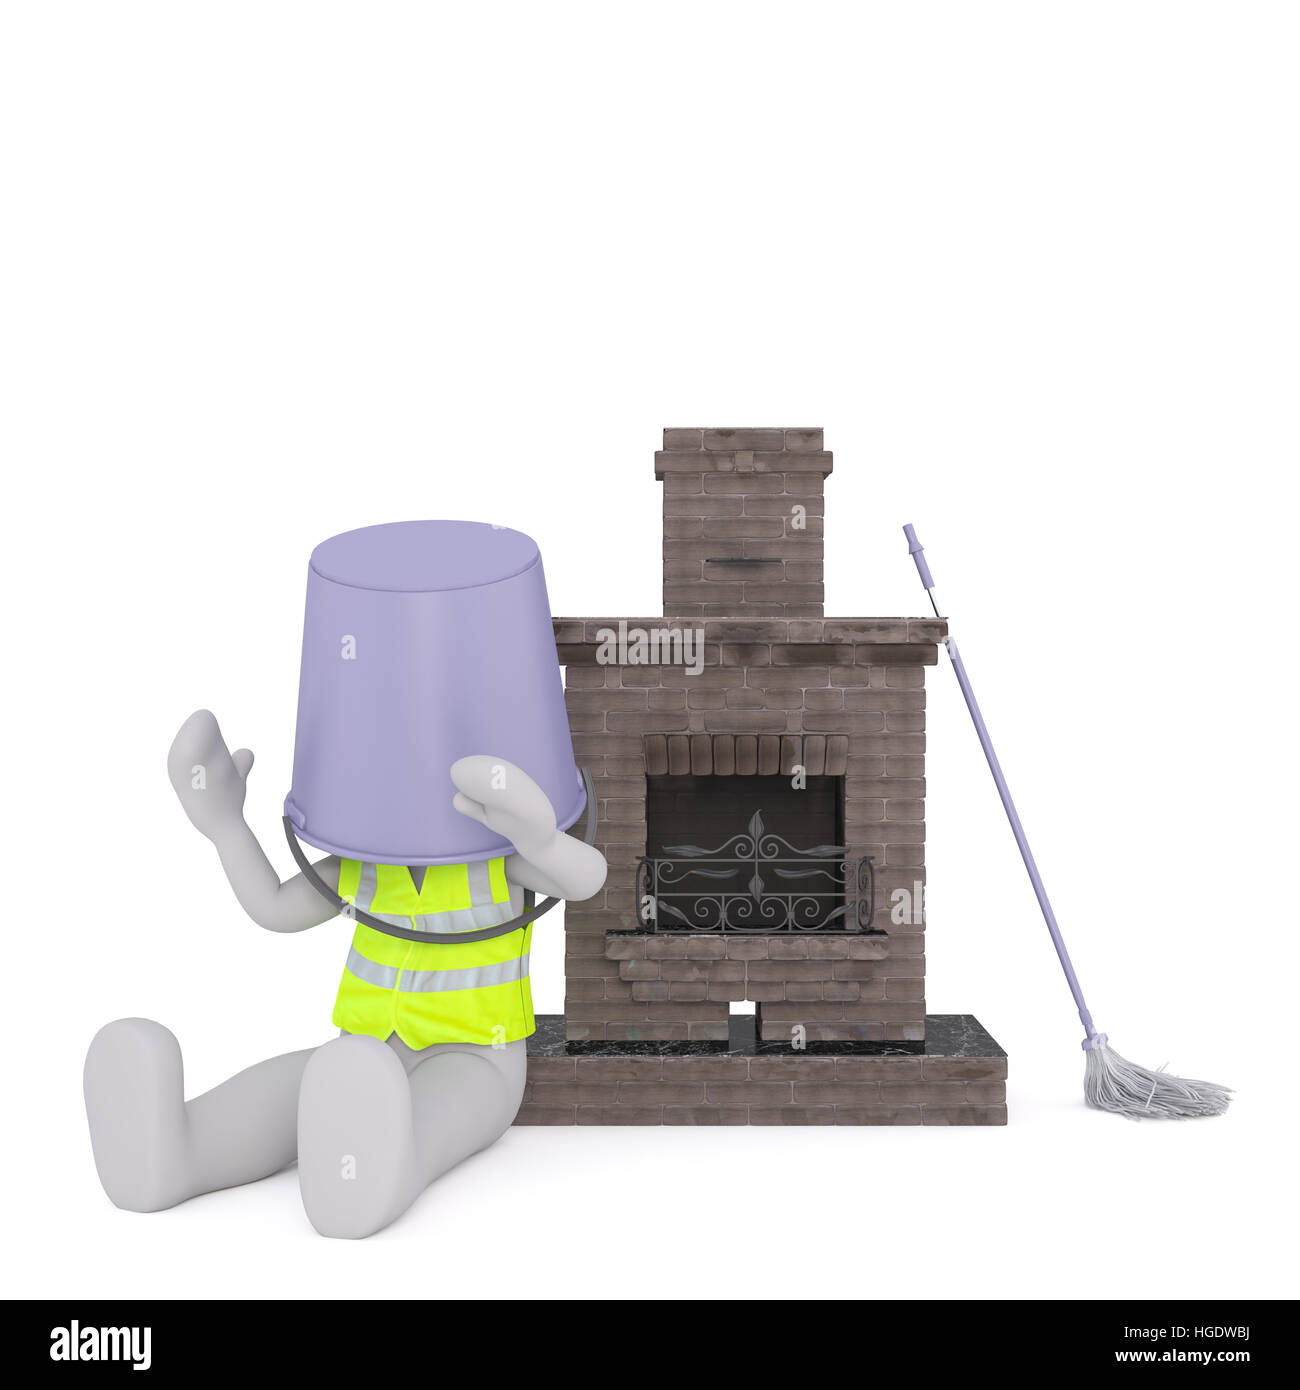 Humorous 3d Rendering of Cartoon Figure Wearing Safety Vest Sitting on Floor with Bucket on Head and Leaning Against Brick Fireplace in front of White Stock Photo